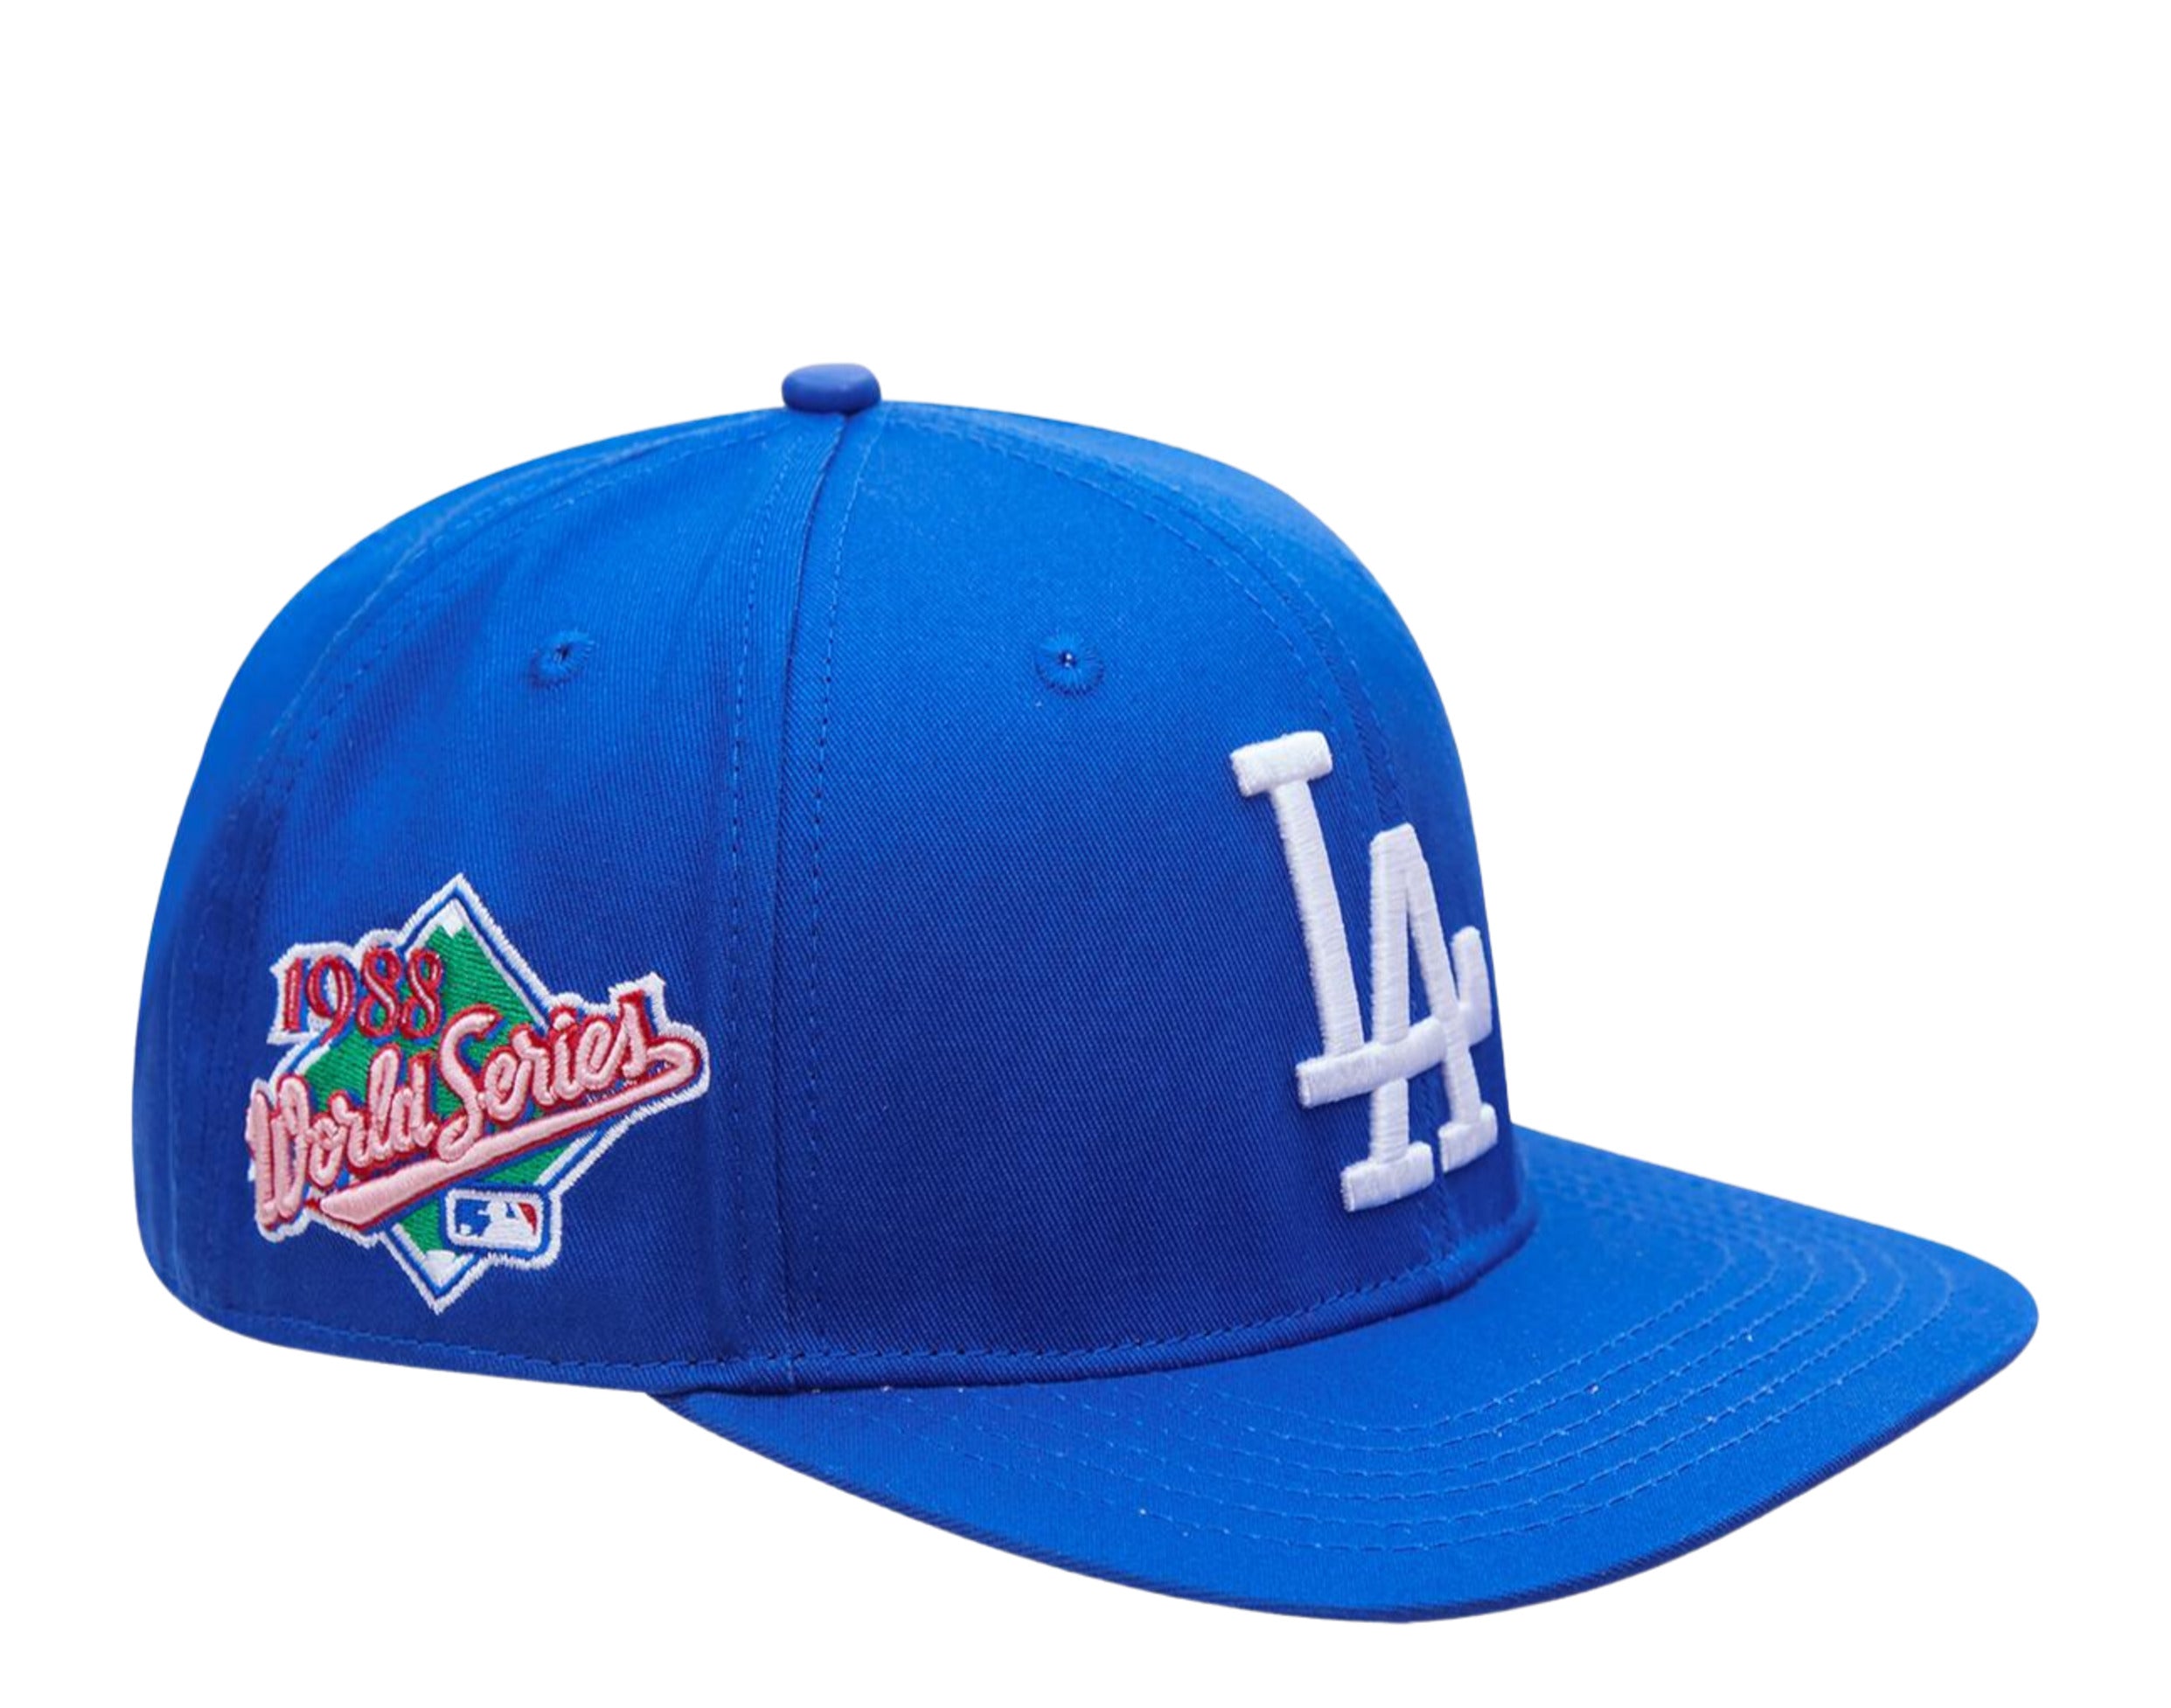 55 85 L.A. Dodgers Game Used Official MLB Baseball Cap Hat size 7 1/8 shows  use - Game Used MLB Hats at 's Sports Collectibles Store